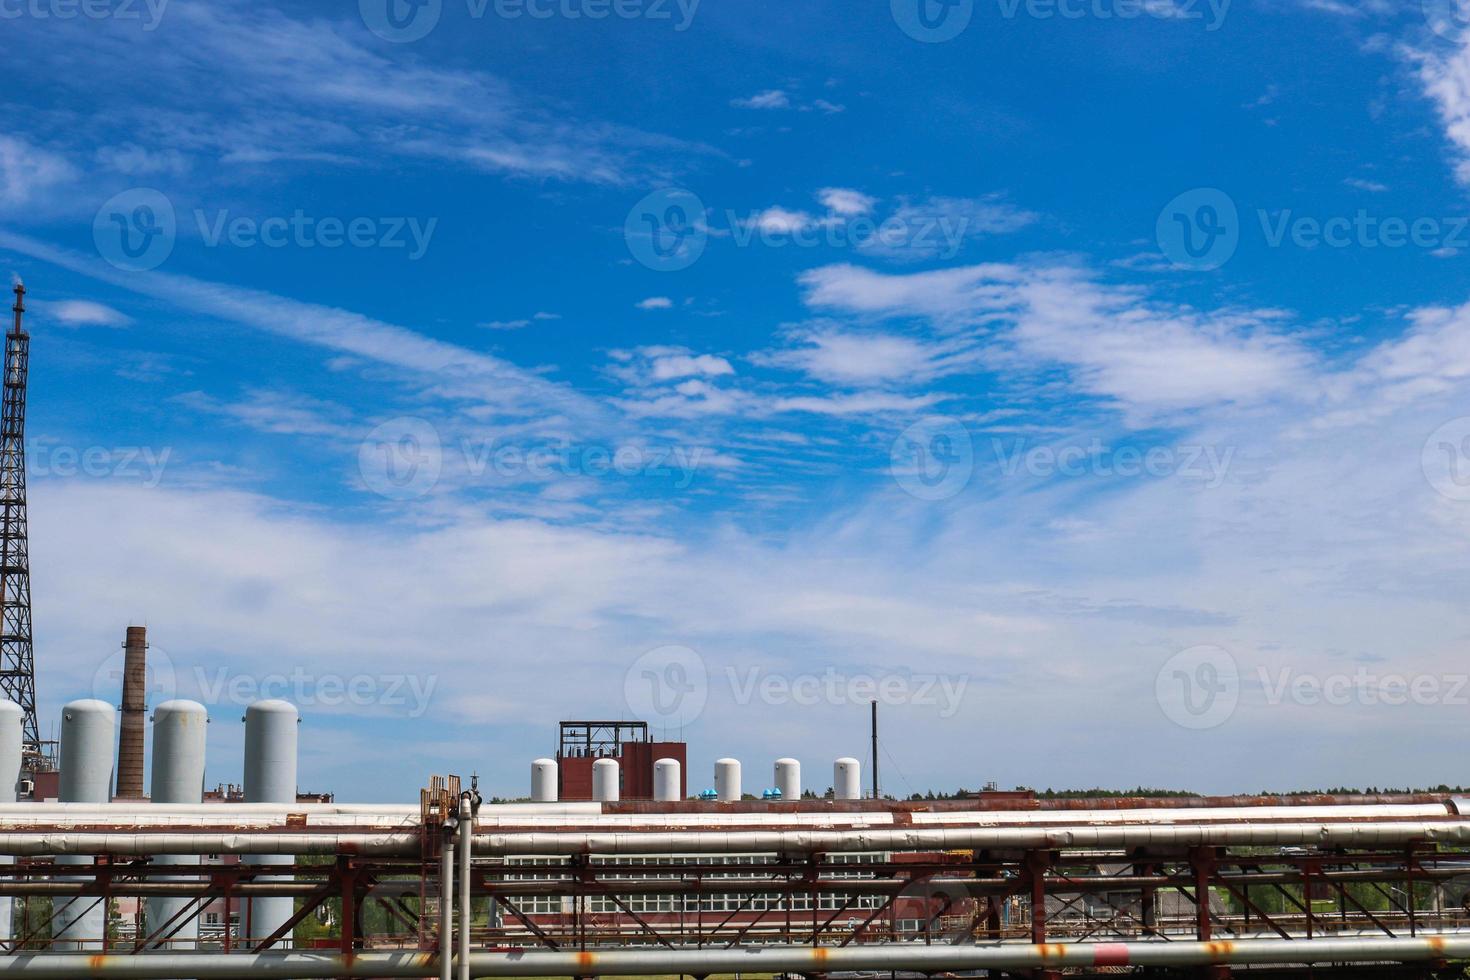 View of a pipeline overpass with pipes, columns of tanks against a blue sky with clouds at an industrial chemical refinery petrochemical plant photo